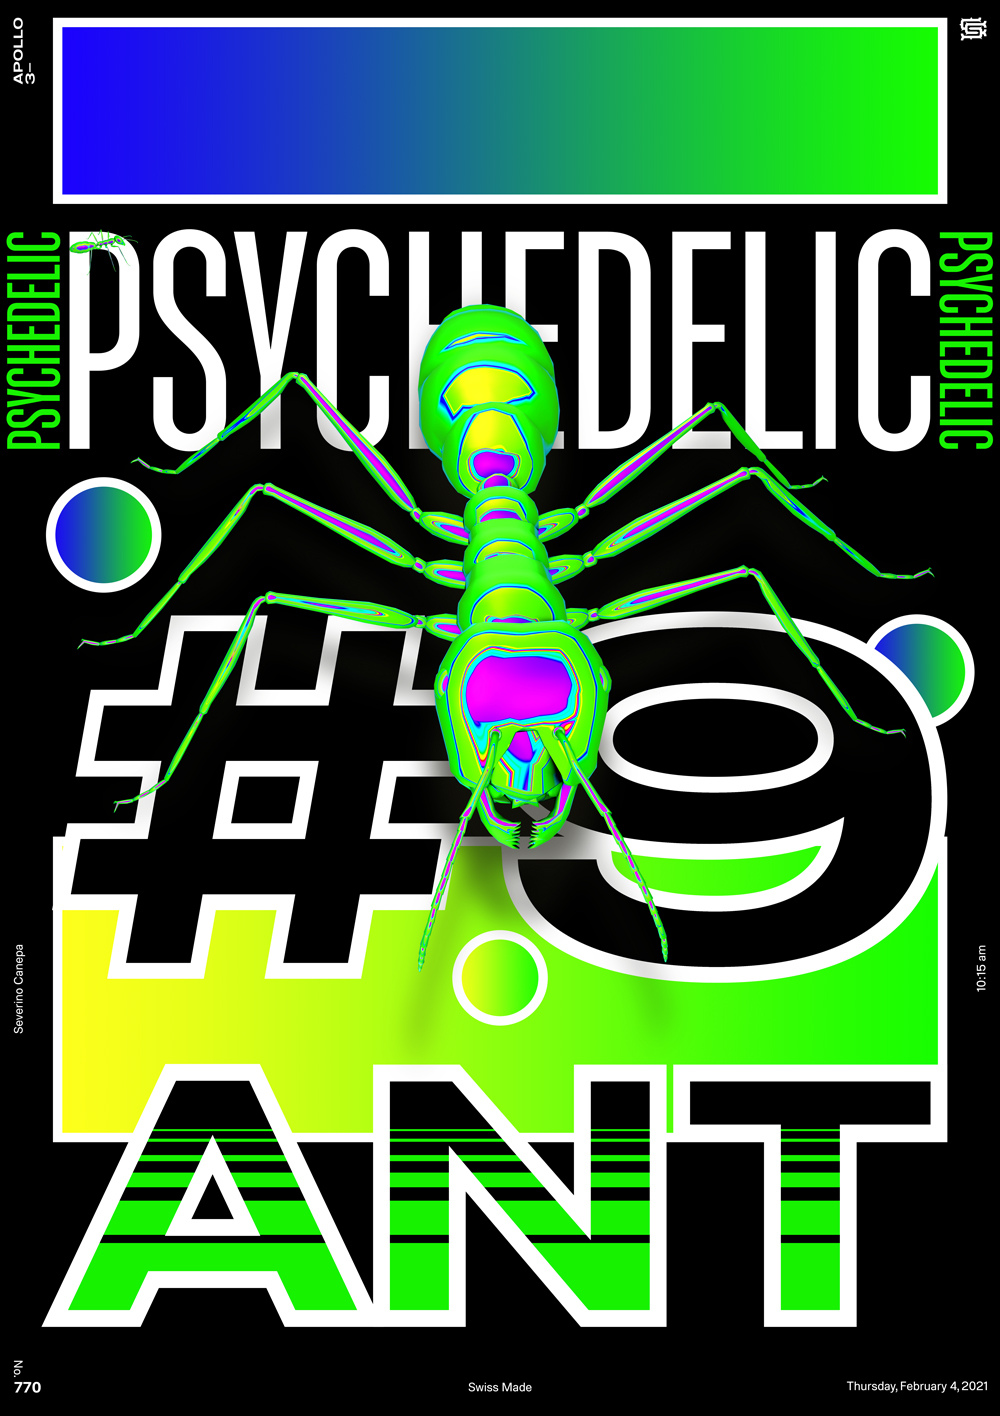 Psycho creation with the 3D render of the iridescent ant on a black background